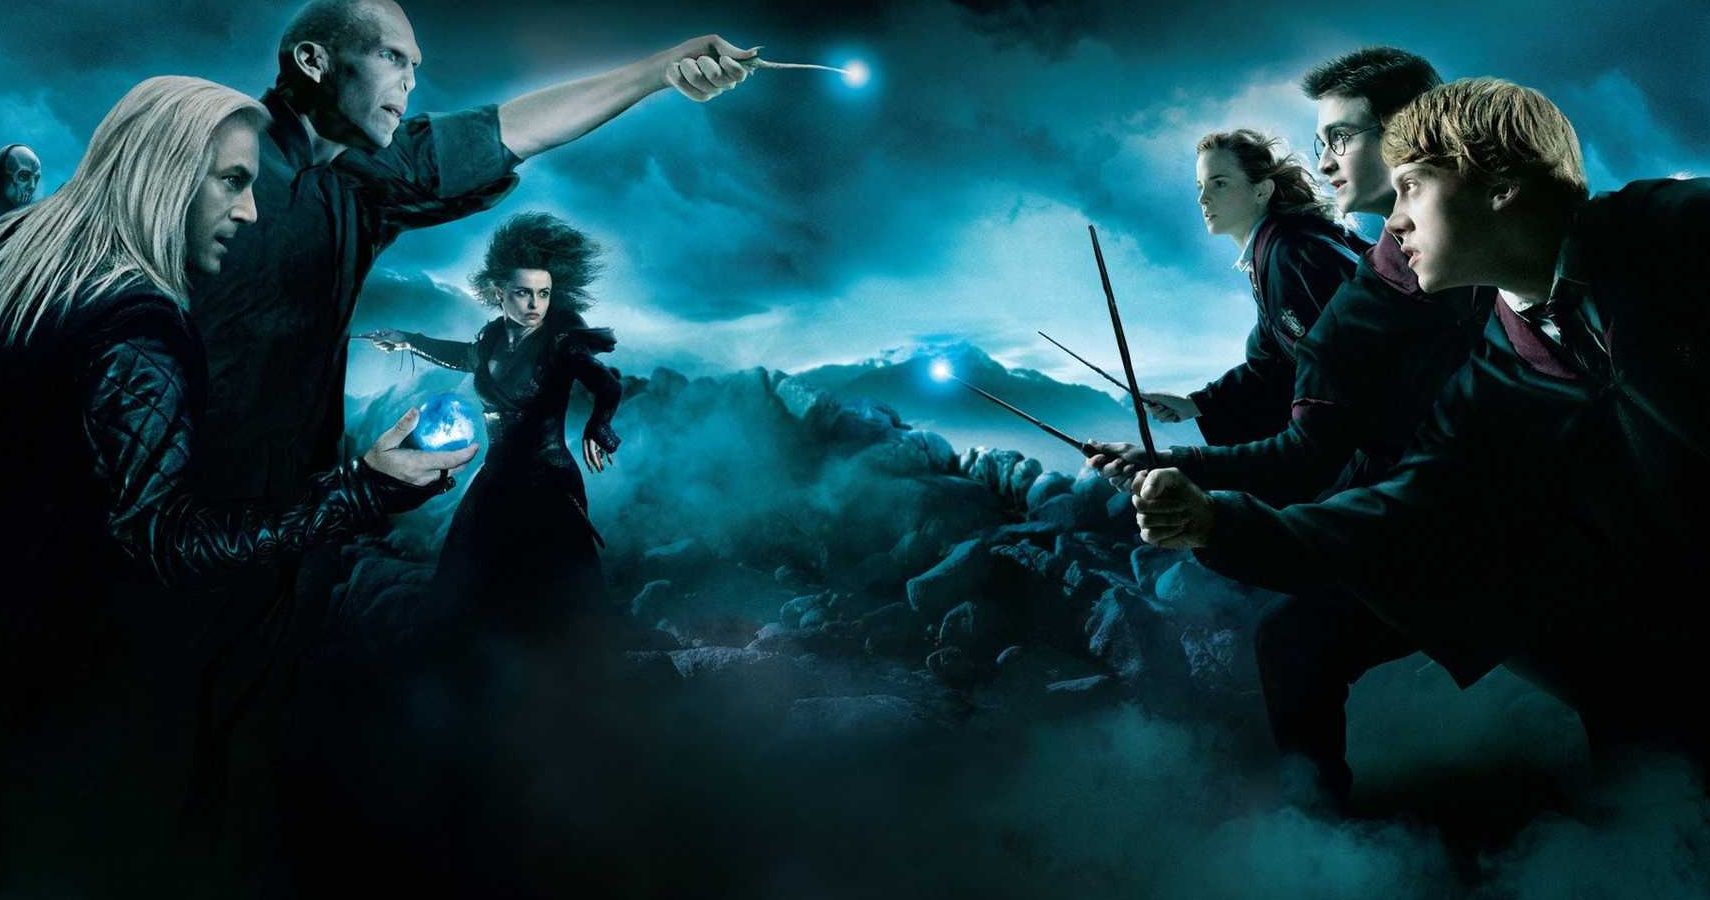 5 Reasons Harry Potter Was OverHyped (& 5 It Will Last The Test Of Time)